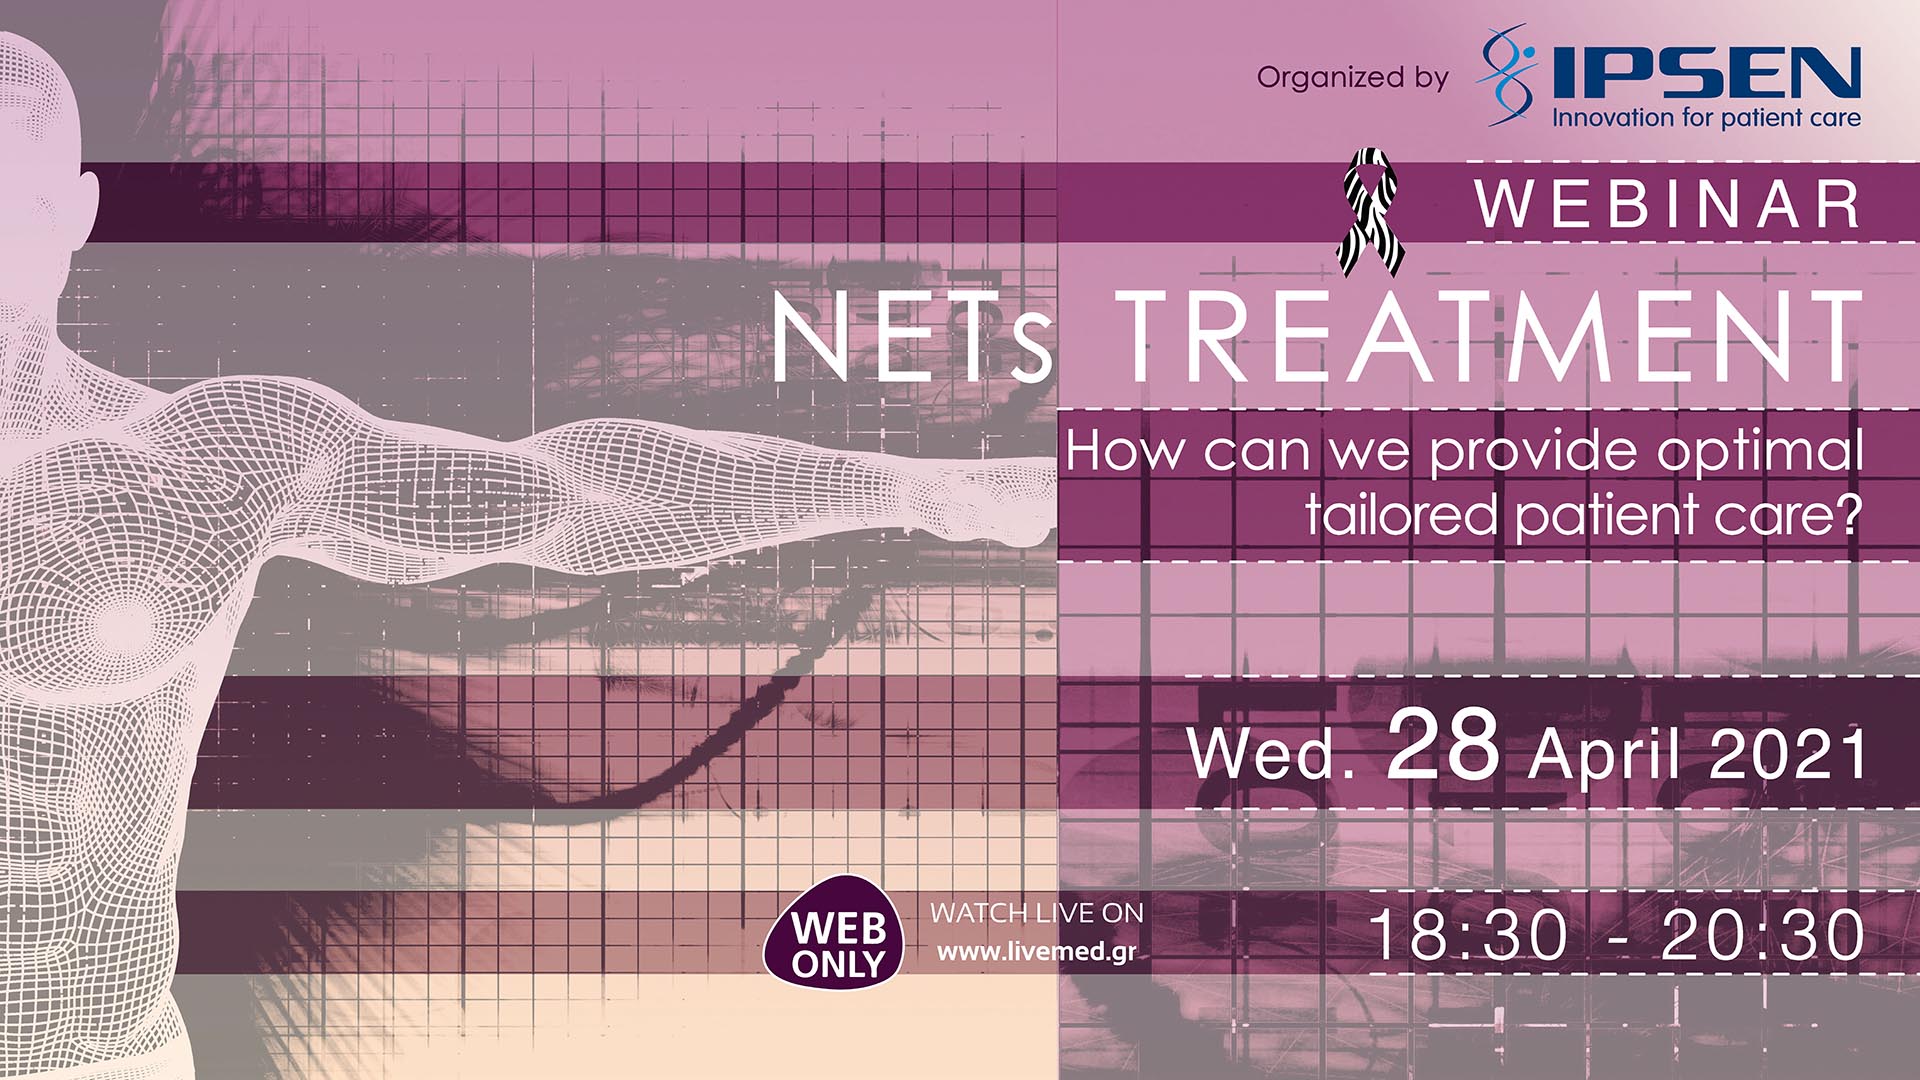 Webinar - NETs Treatment - How can we provide optional tailored patient care?